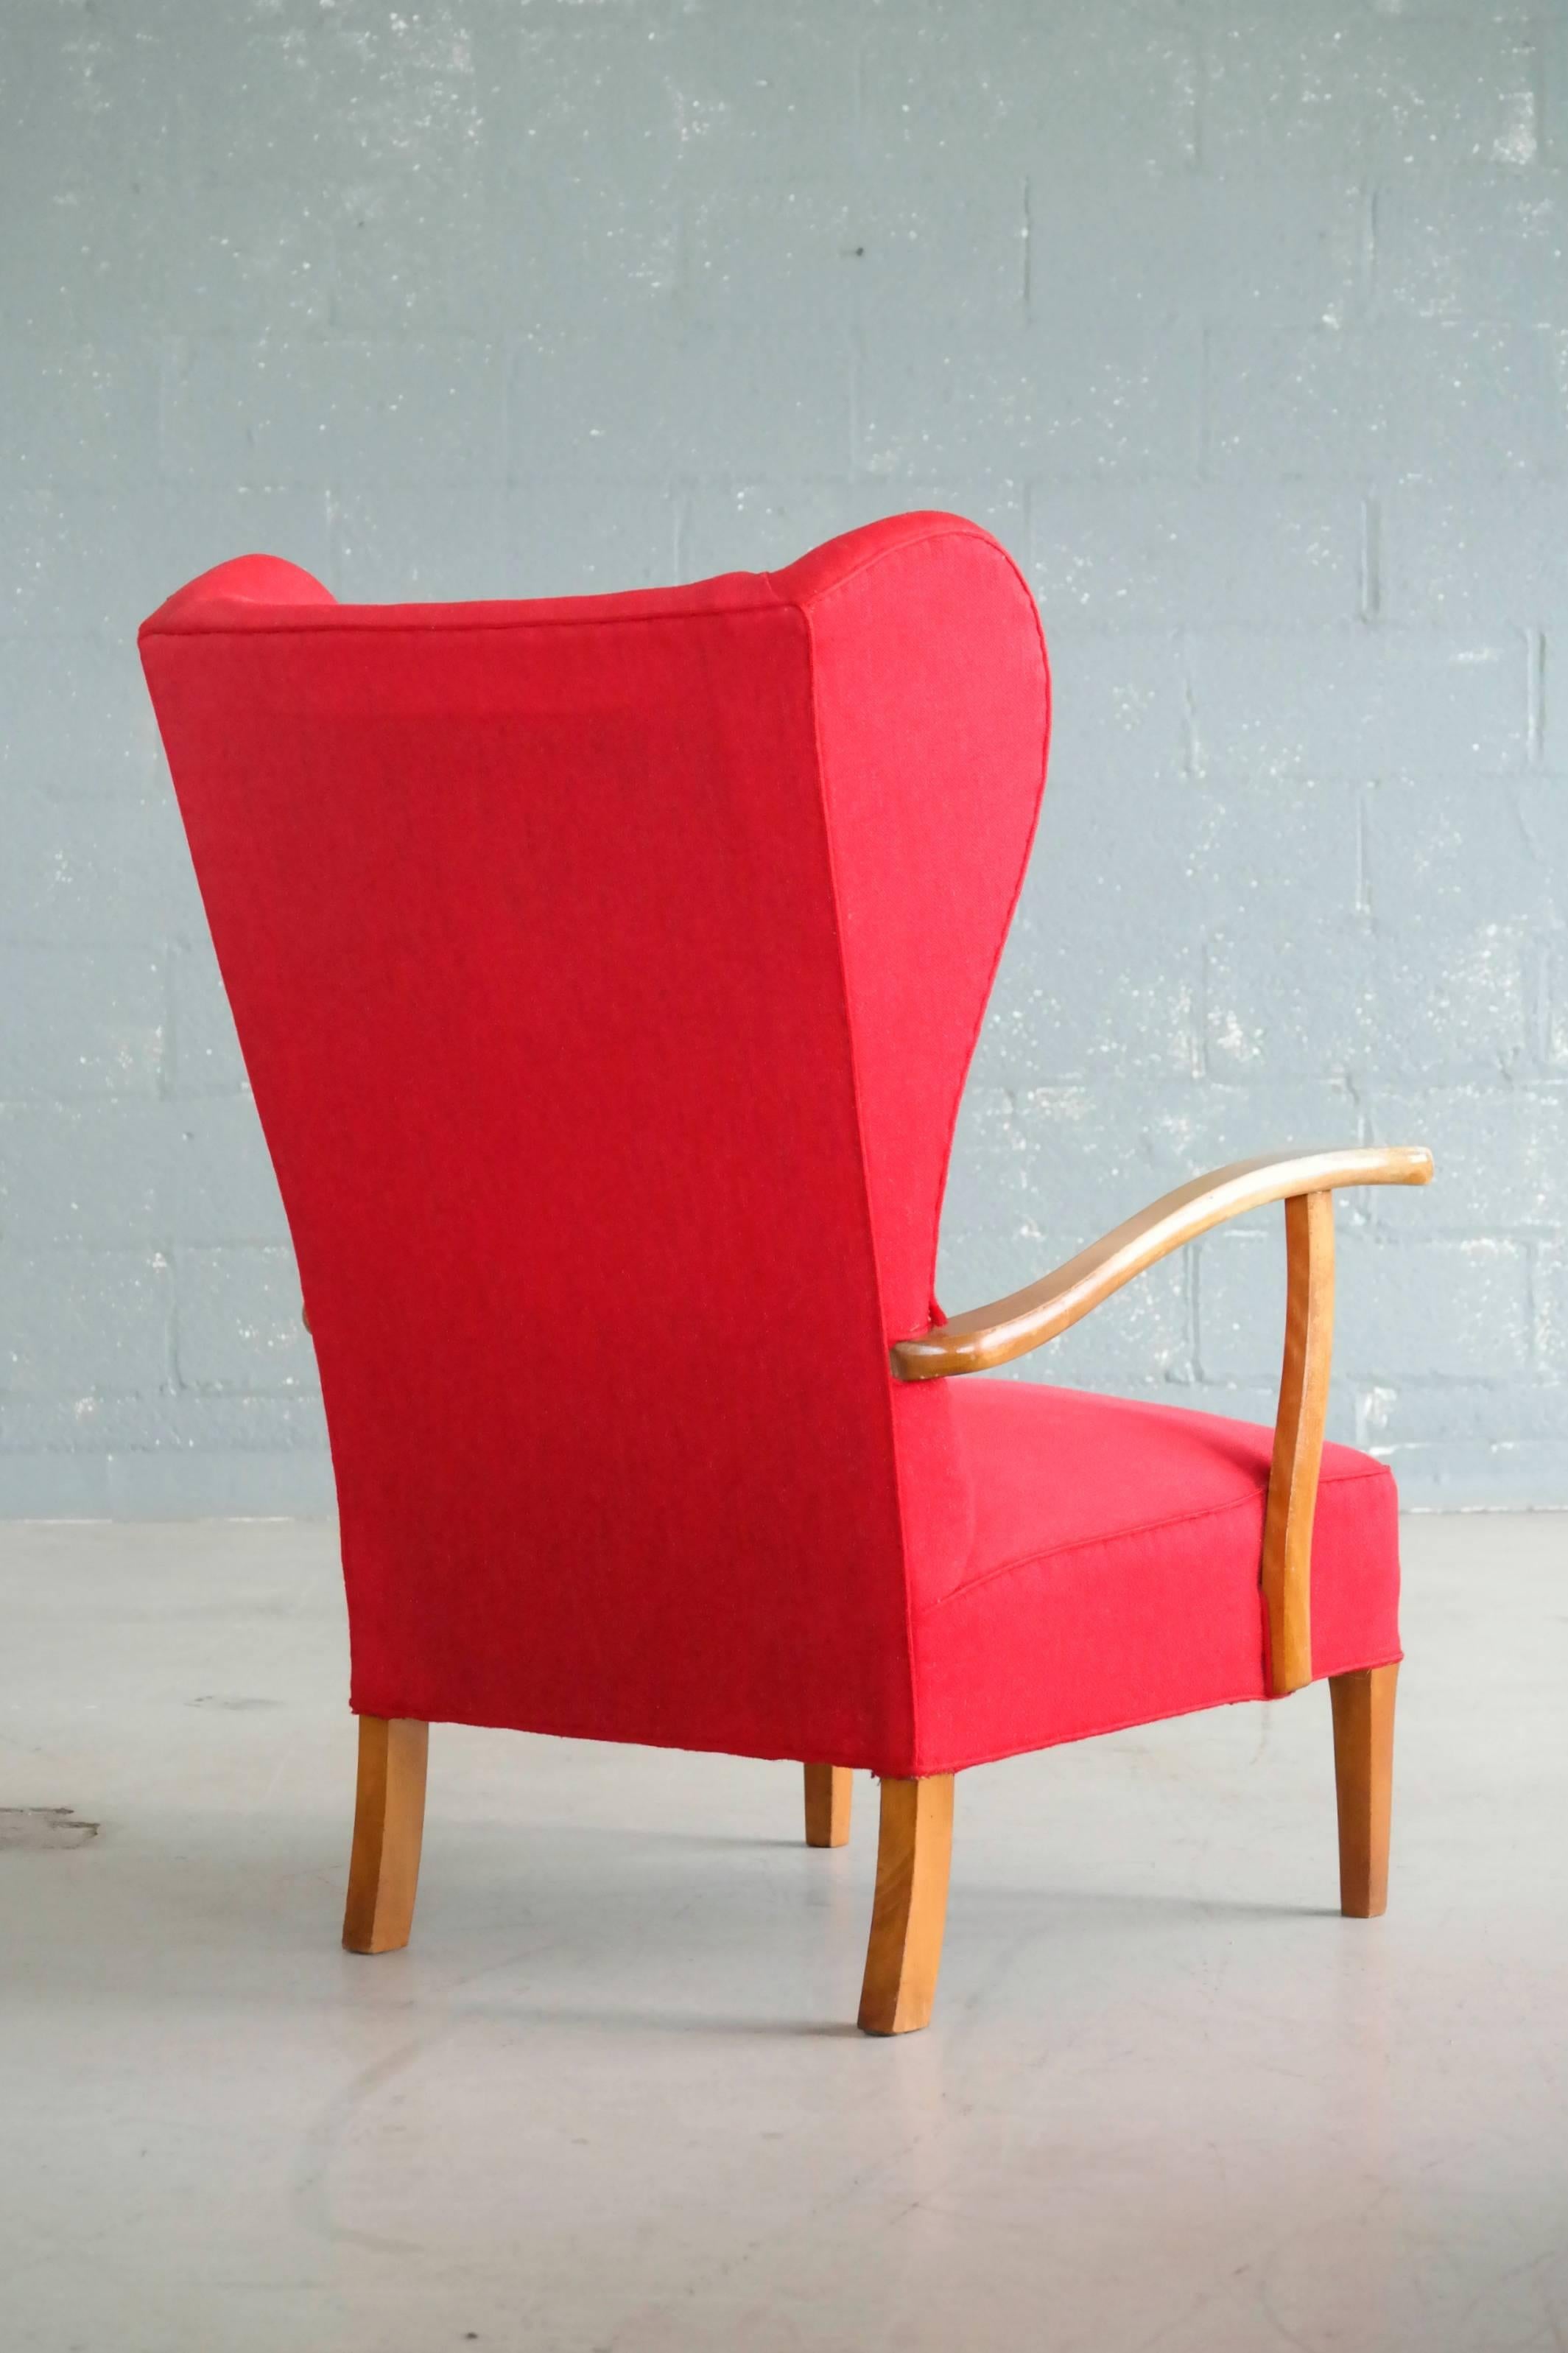 Mid-20th Century Danish Midcentury Wingback Lounge Chair Attributed to Fritz Hansen